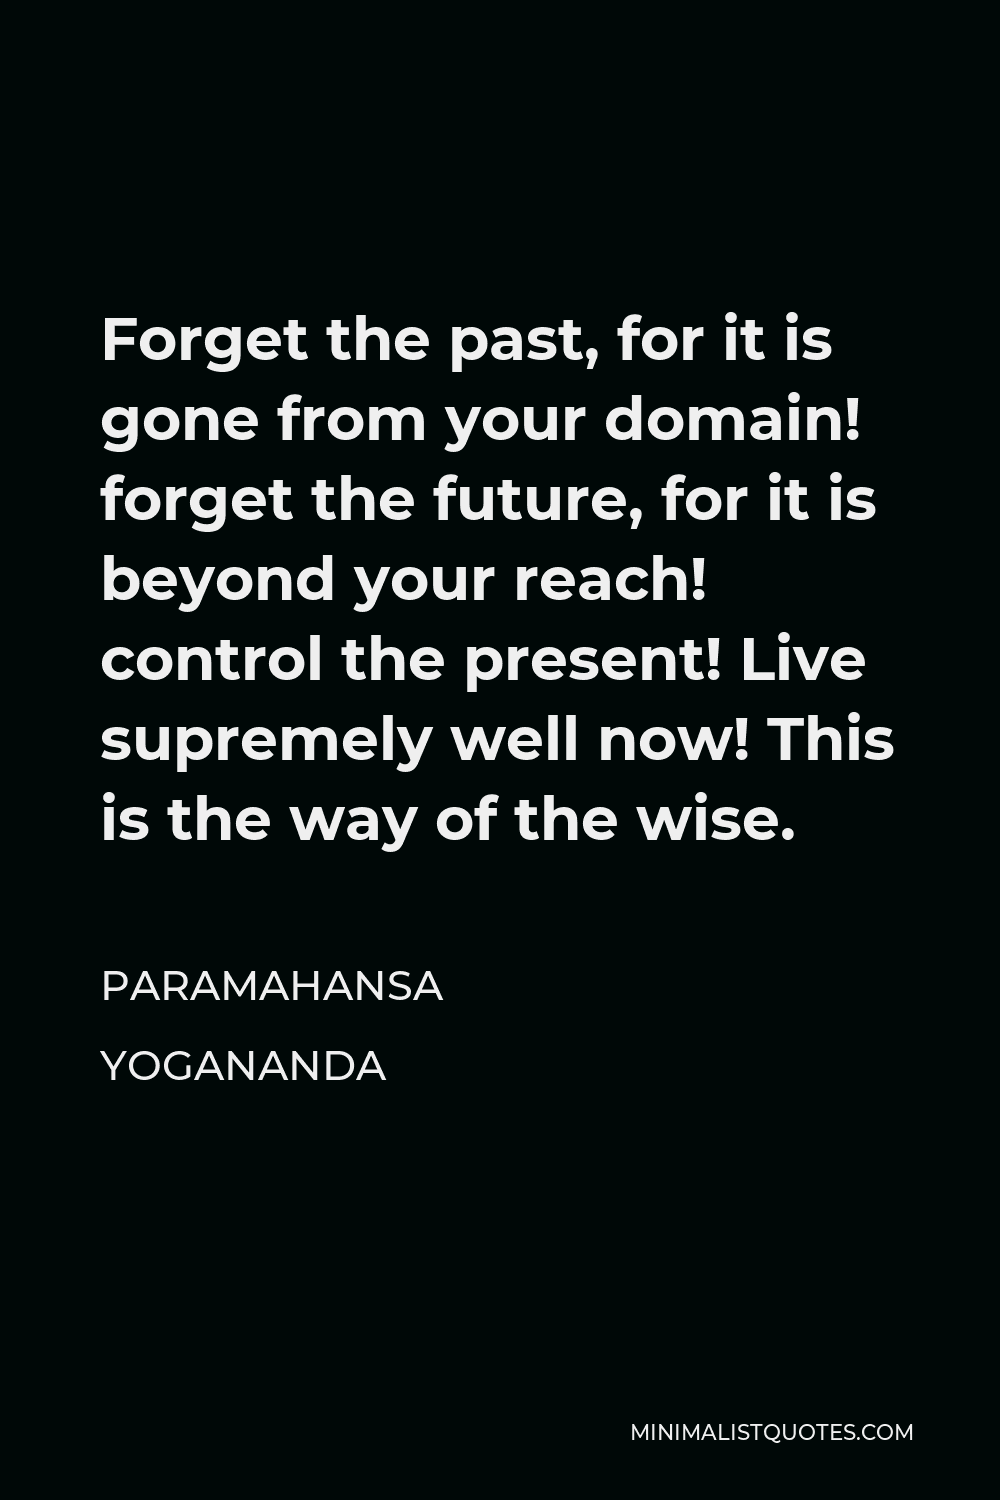 Paramahansa Yogananda Quote - Forget the past, for it is gone from your domain! forget the future, for it is beyond your reach! control the present! Live supremely well now! This is the way of the wise.